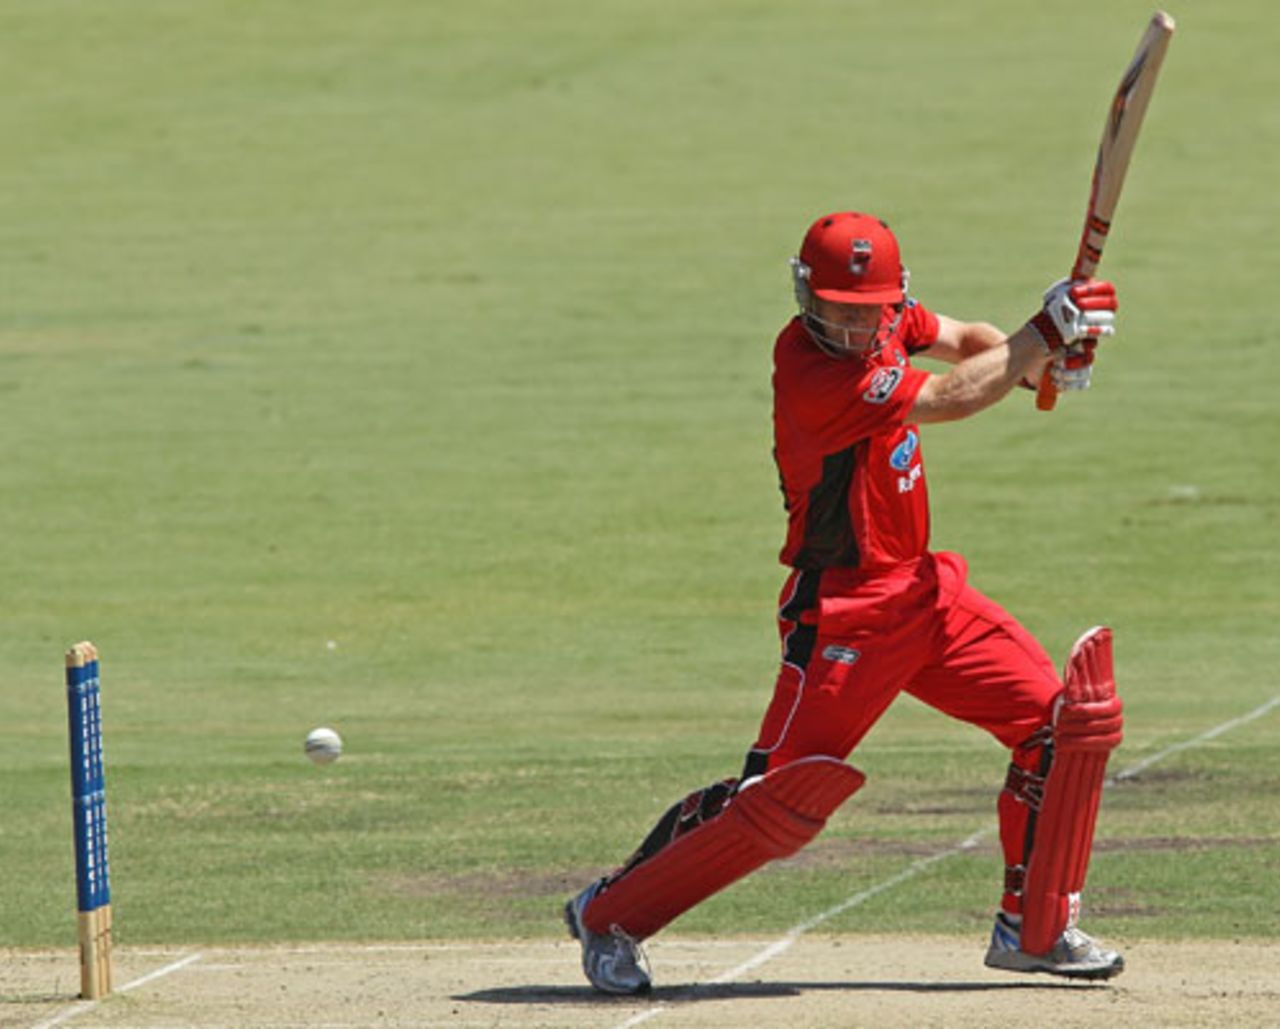 Daniel Harris top scored for South Australia with 63, South Australia v New South Wales, FR Cup, Adelaide, 24 February, 2010